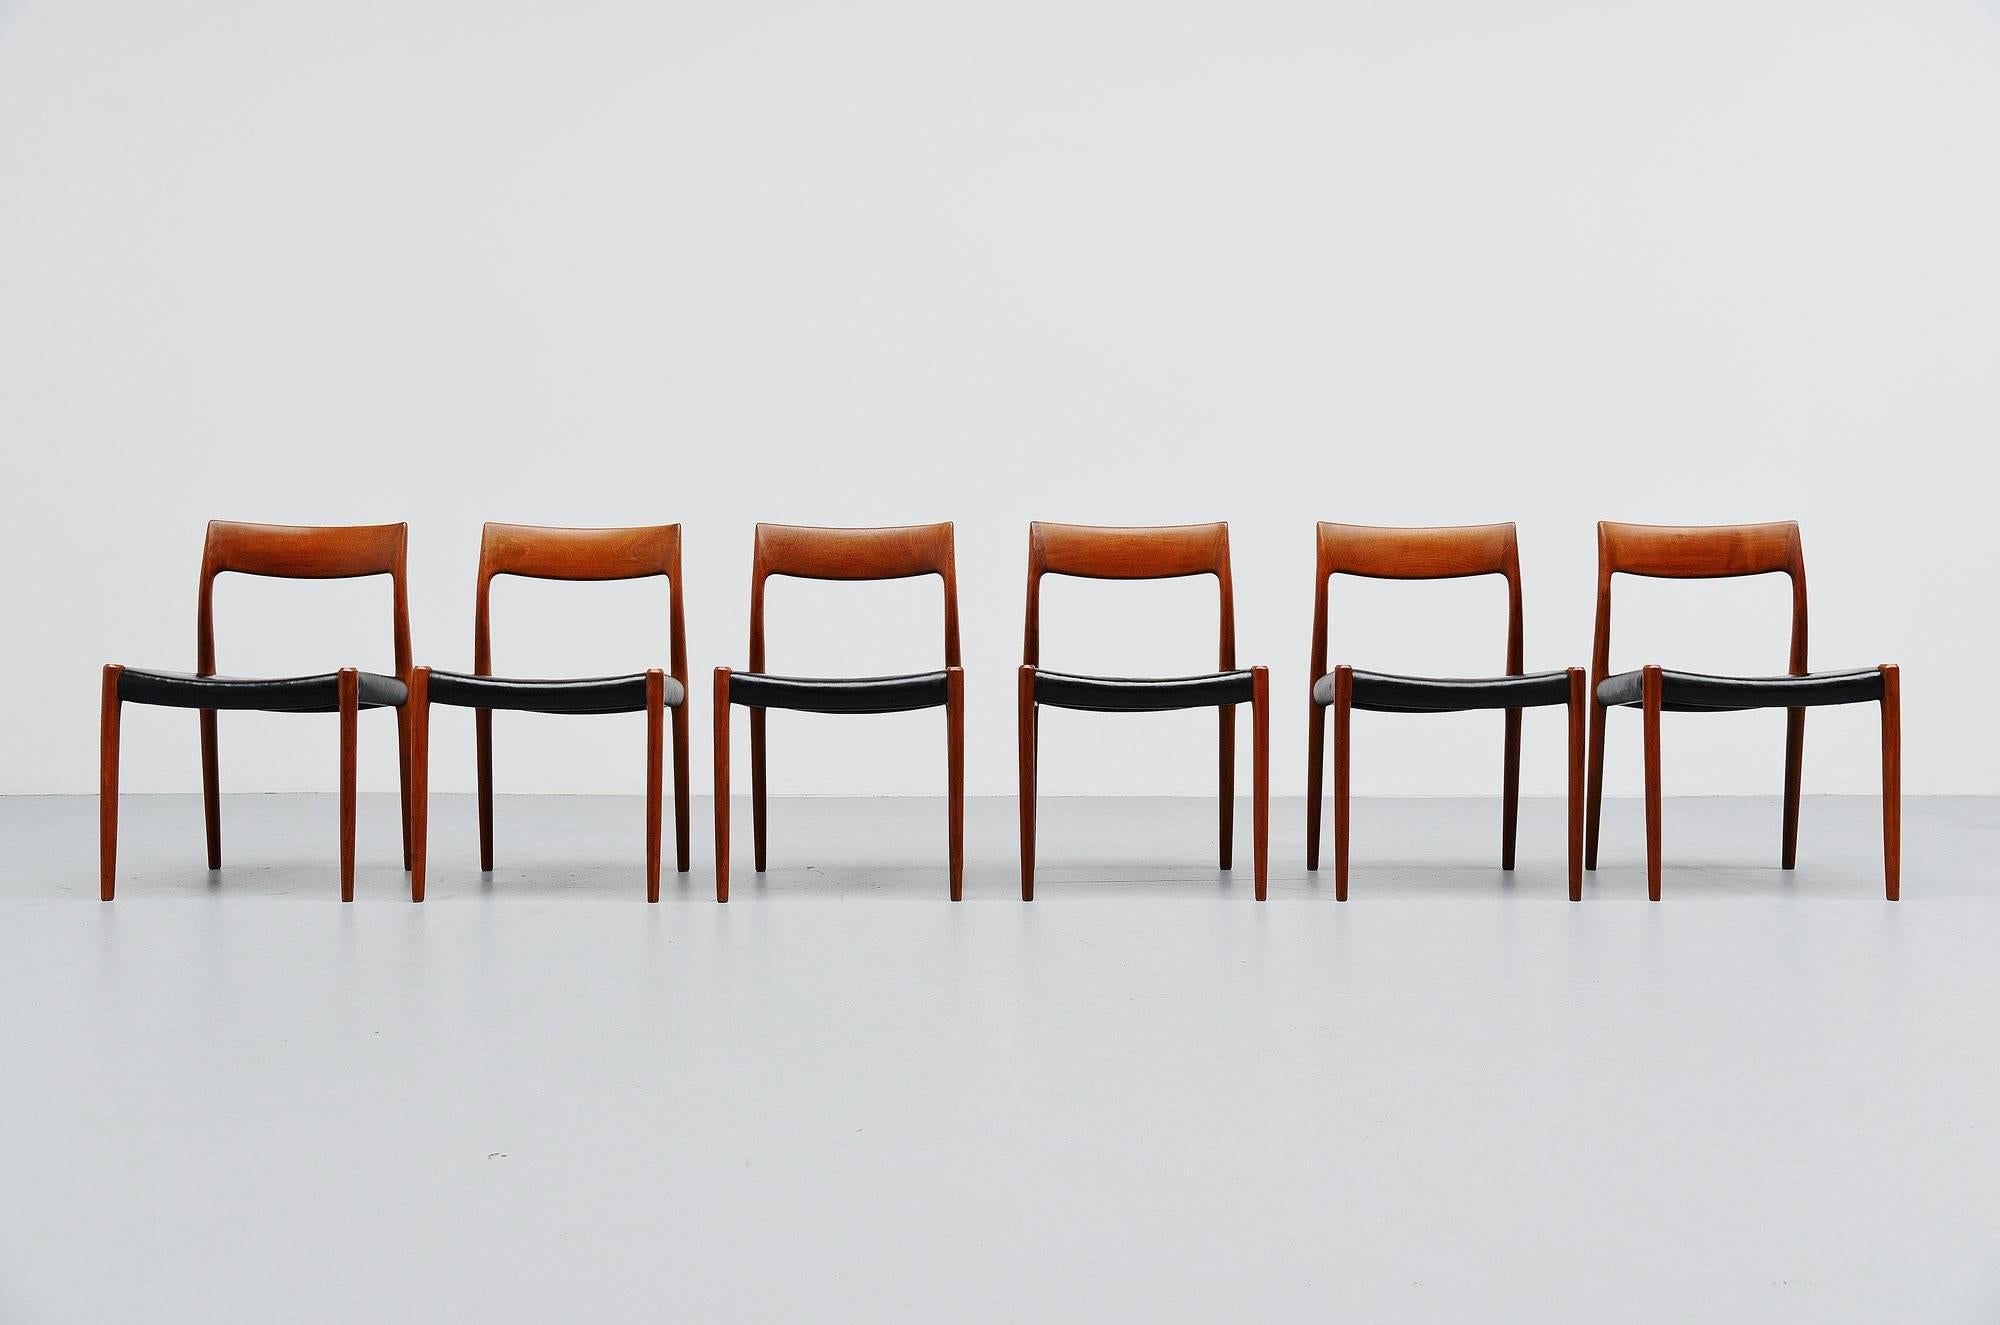 Very nice set of six dining chairs model 77 designed by Niels Moller for J.L. Møller Mobelfabrik, Denmark 1959. These chairs are made of solid teak wood and have original black leather upholstery that shows a very nice patina from age and usage. The